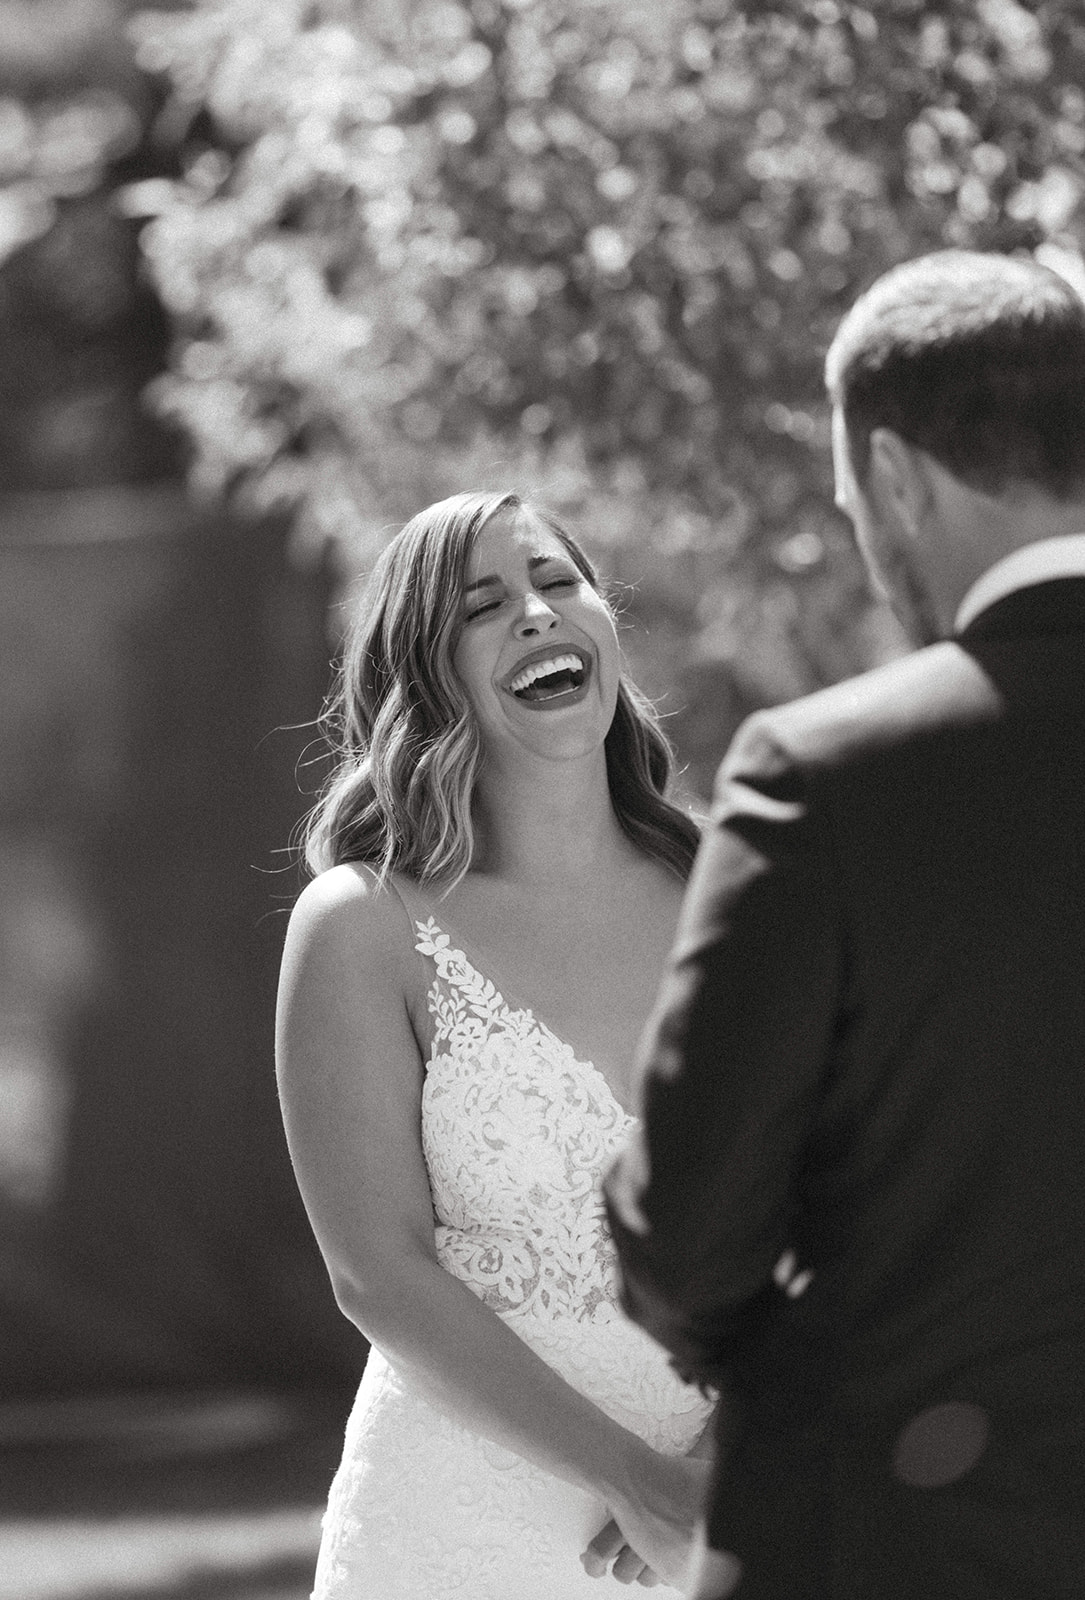 Black and white portrait of a bride and groom sharing their wedding vows at their Deane House wedding ceremony